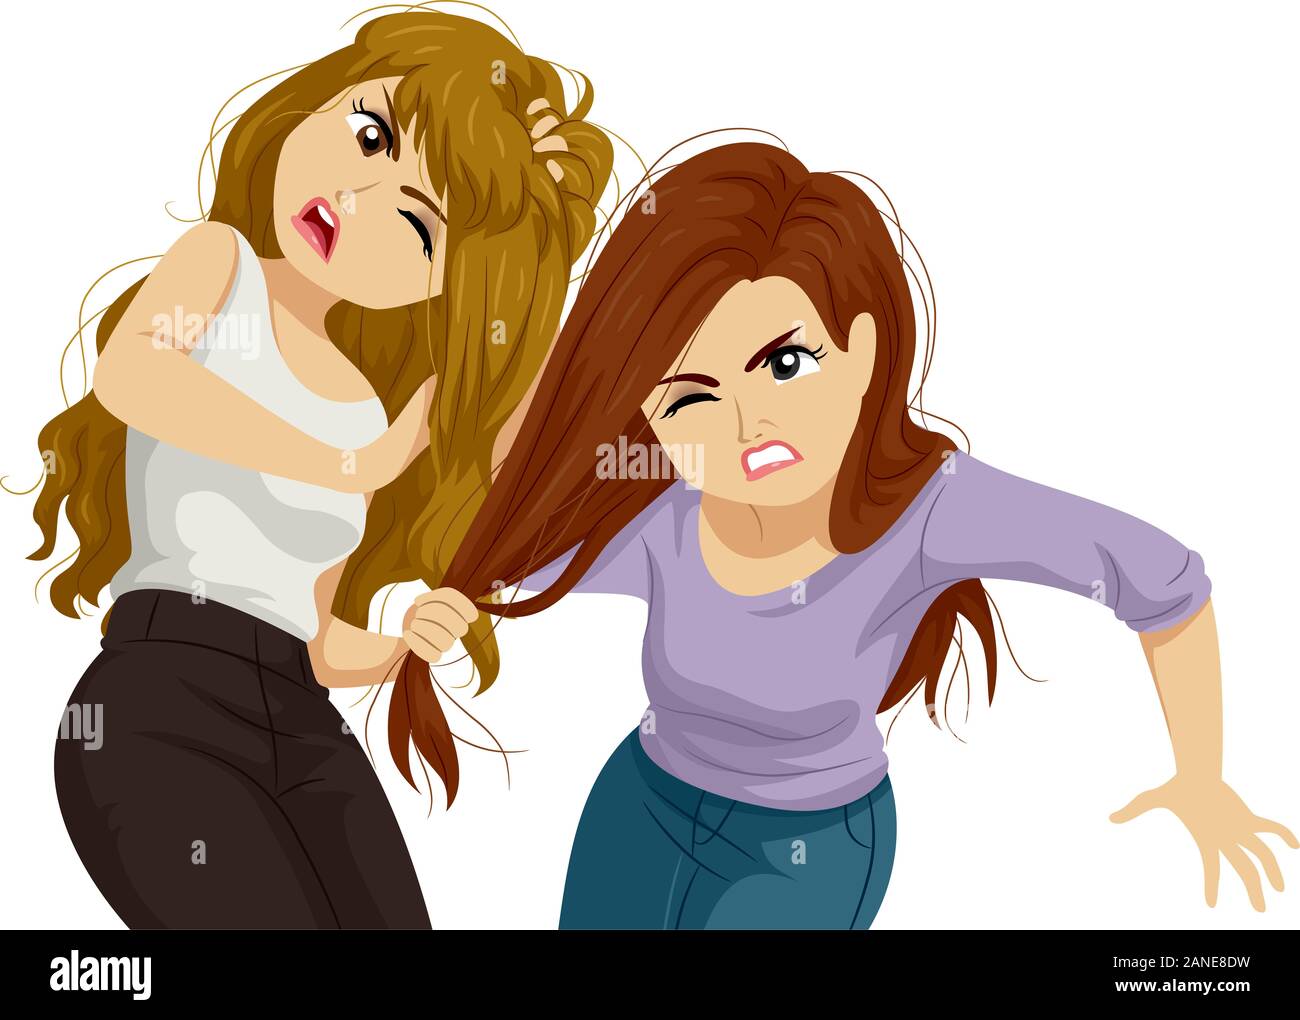 Illustration of Two Teenage Girls Fighting and Pulling Hair of